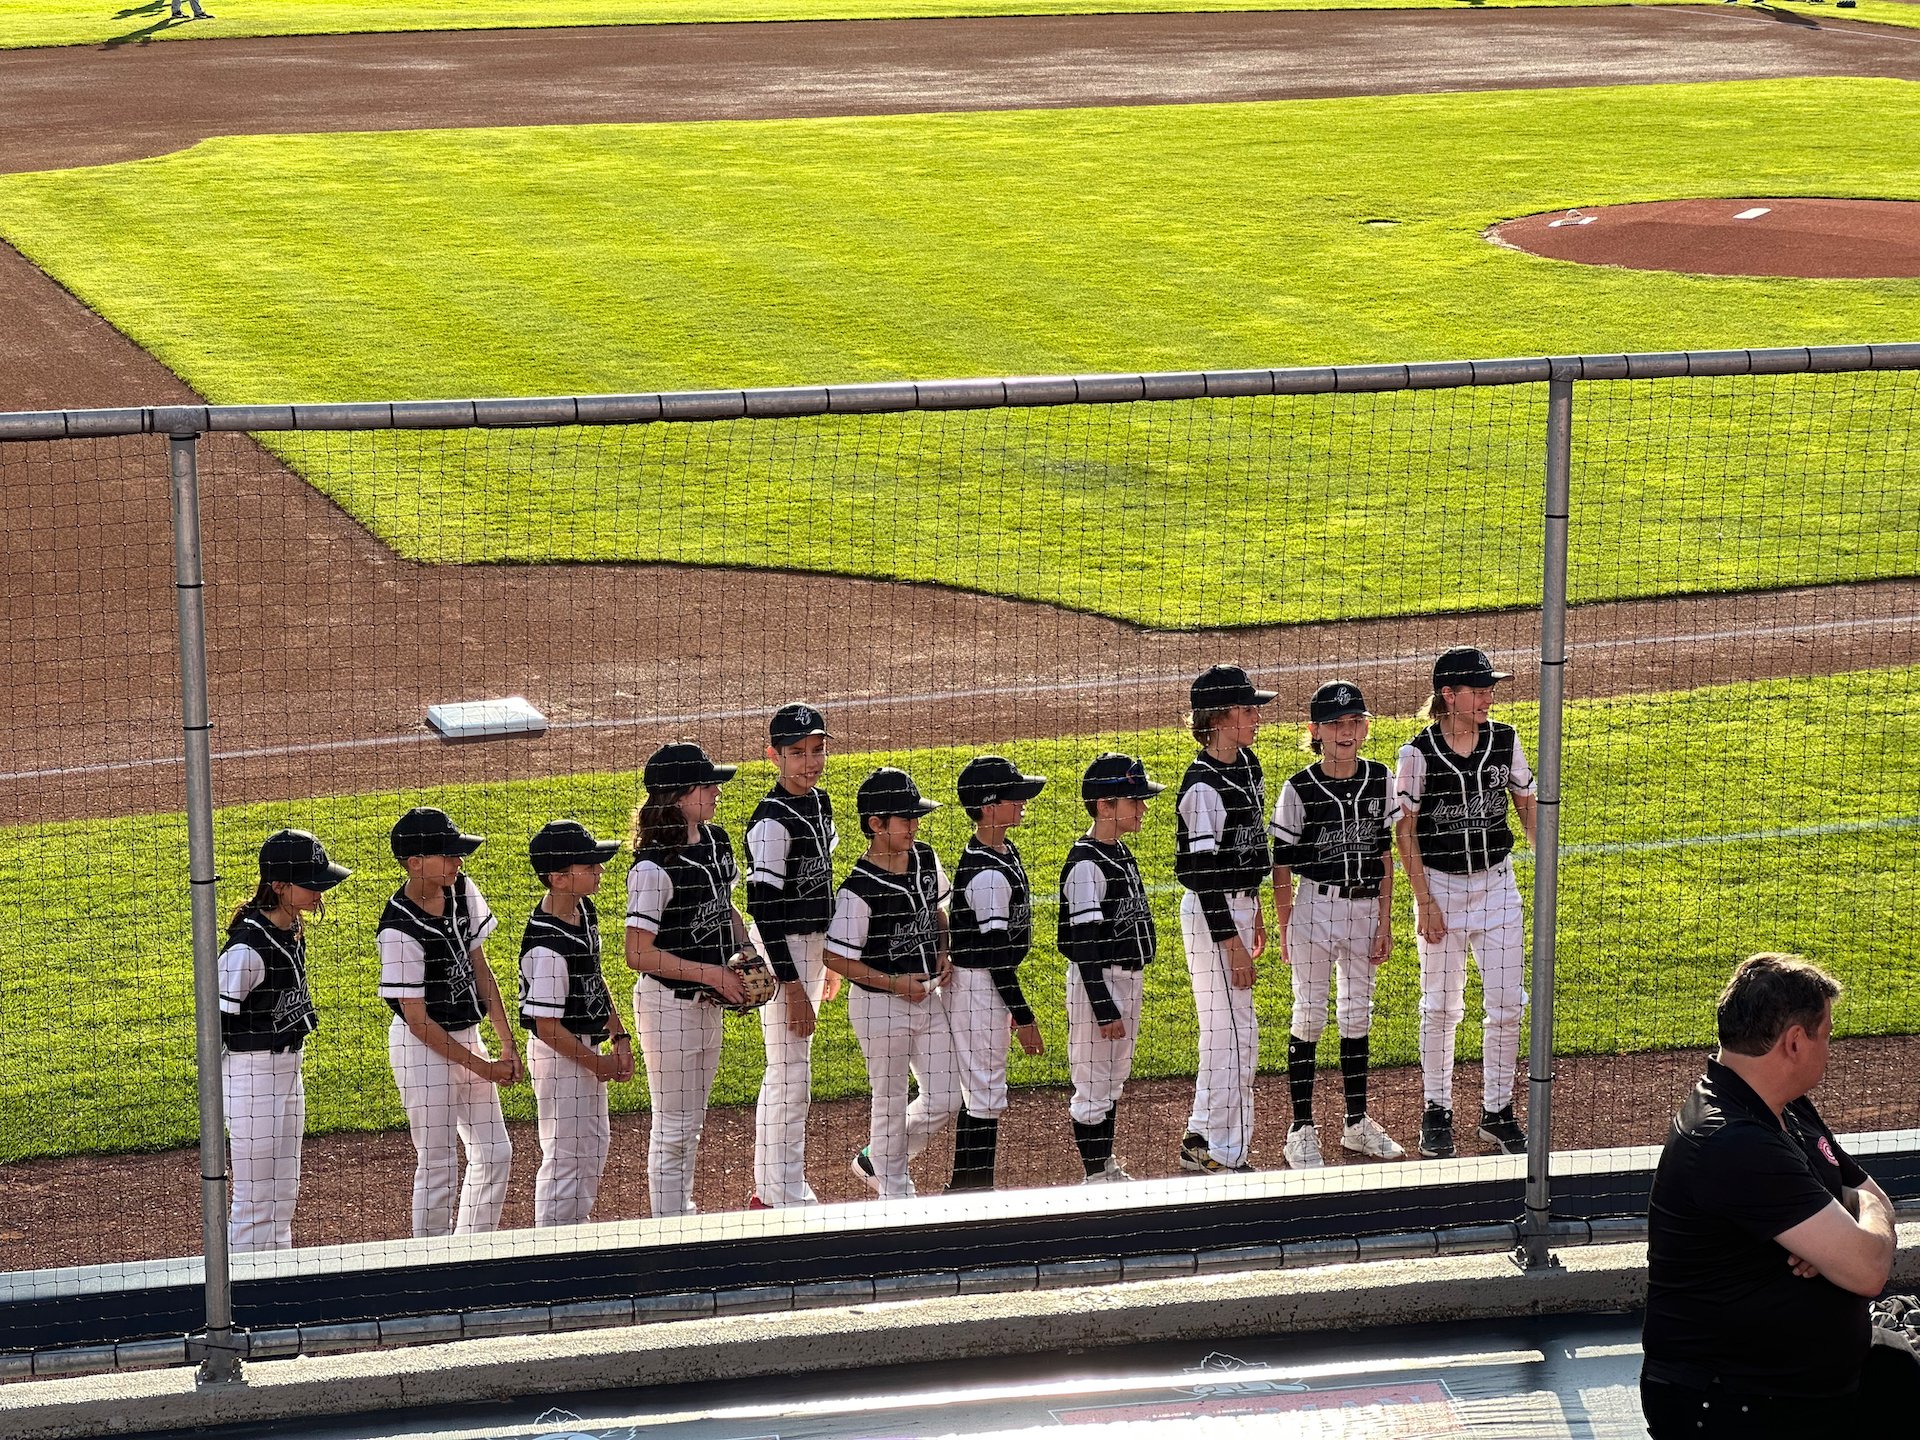  The team on the field before the start of the game - Ethan is on the far right. 